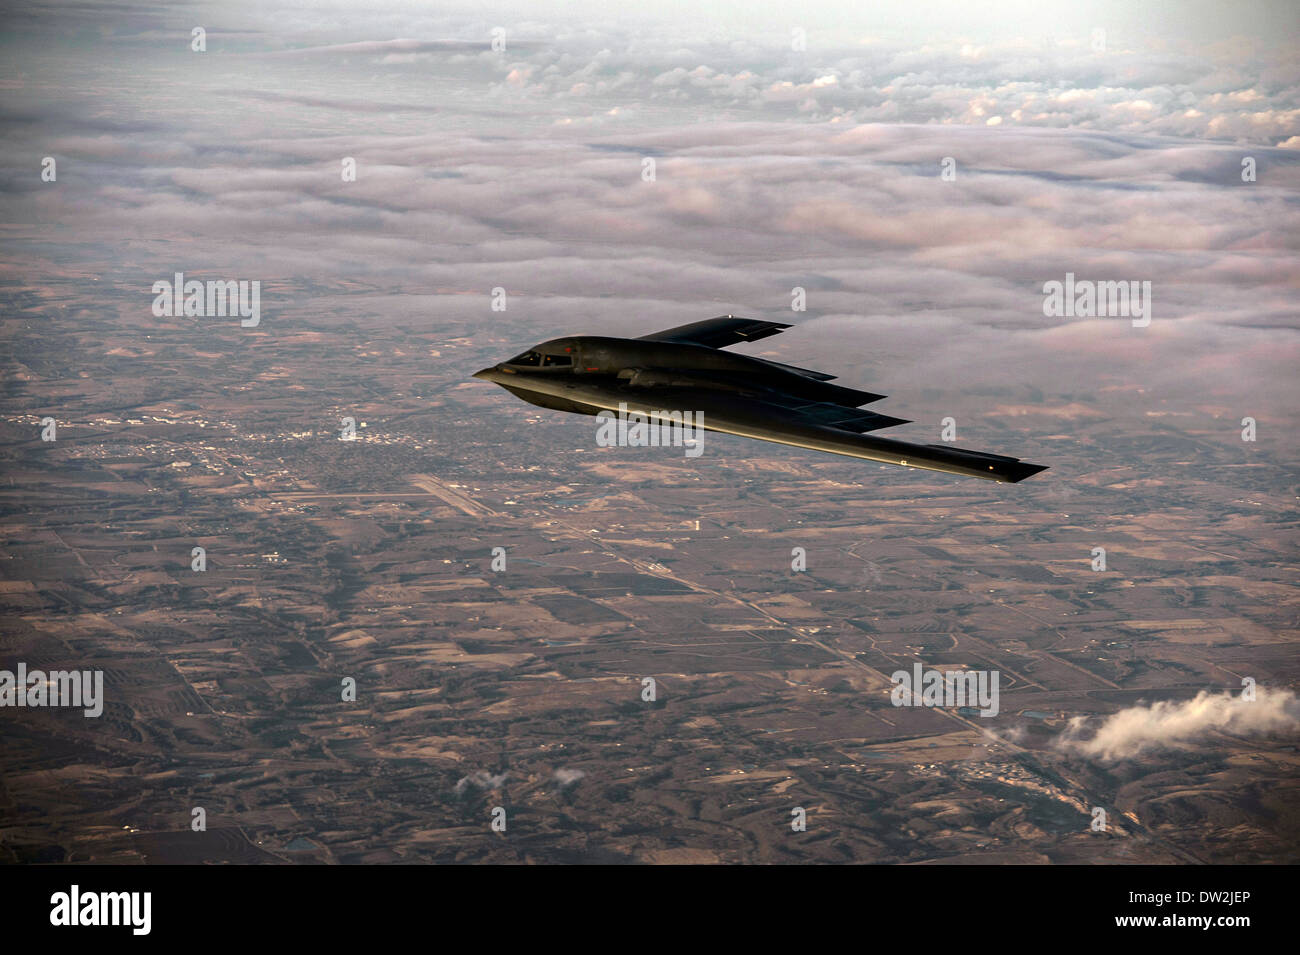 A US Air Force B-2 Spirit stealth bomber aircraft flies over Whiteman Air Force Base February 20, 2014 in Knob Noster, MO. Stock Photo